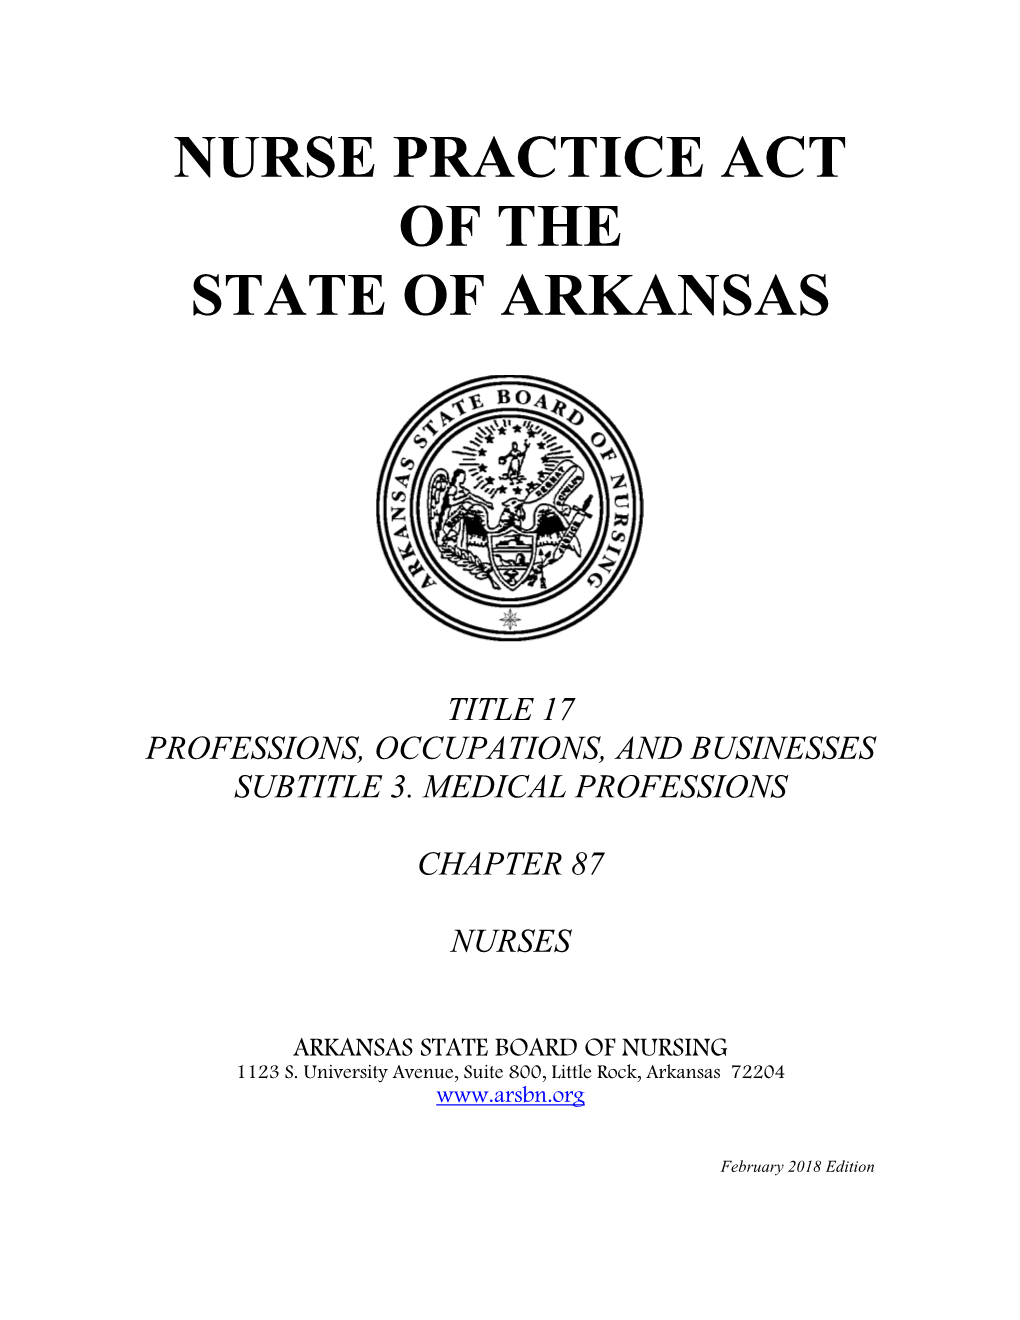 Nurse Practice Act of the State of Arkansas